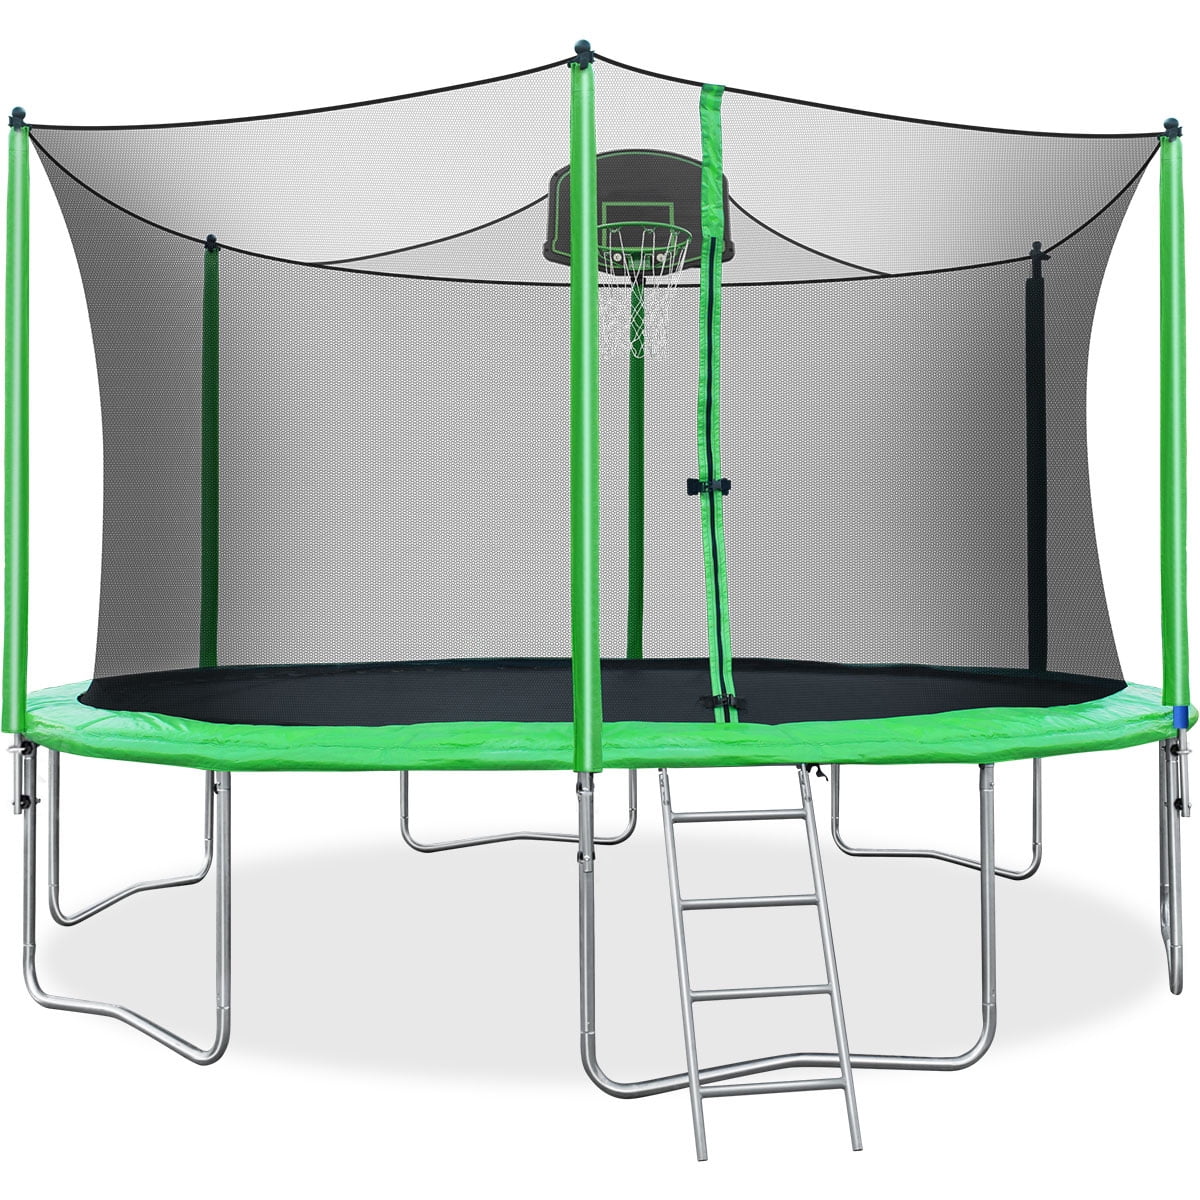 Merax 12FT Outdoor Round Trampoline with Safety Enclosure Basketball Hoop&Ladder 